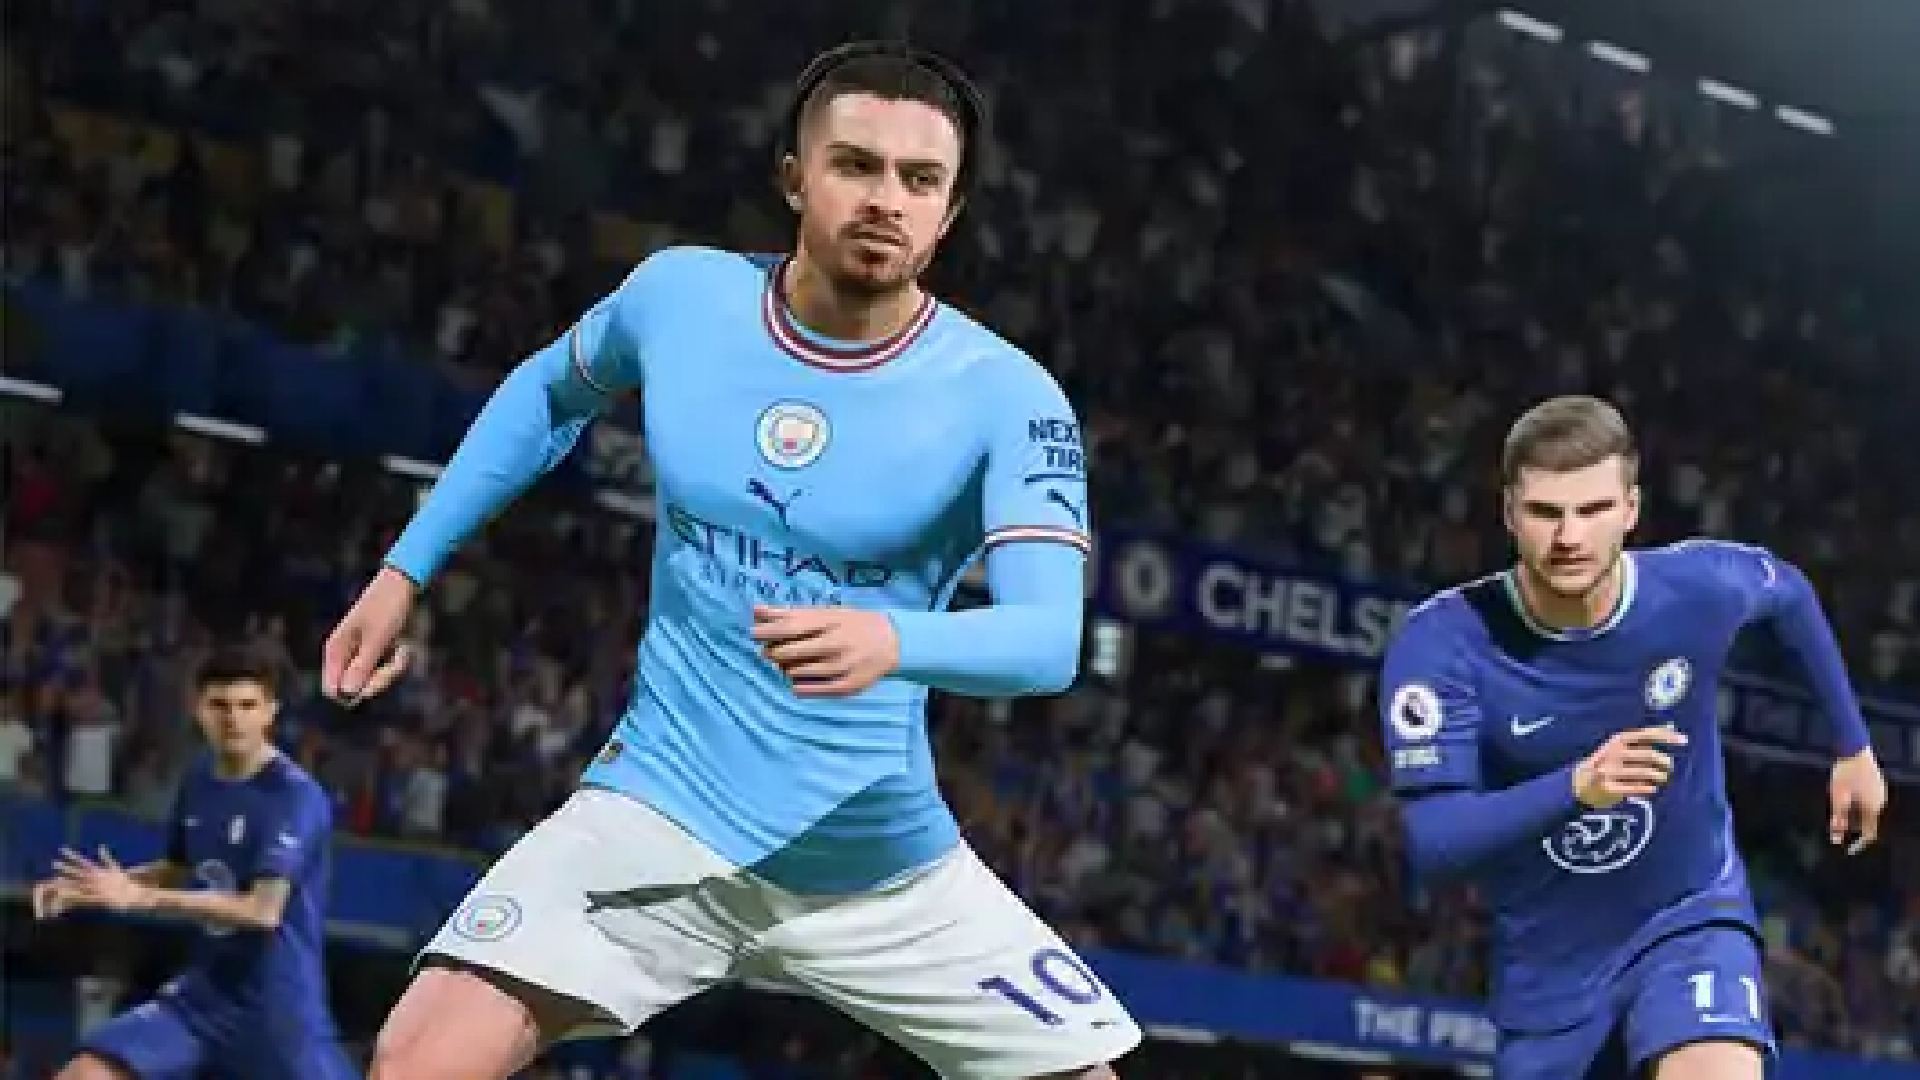 EA simply does not care: Fans react as problems with SBCs